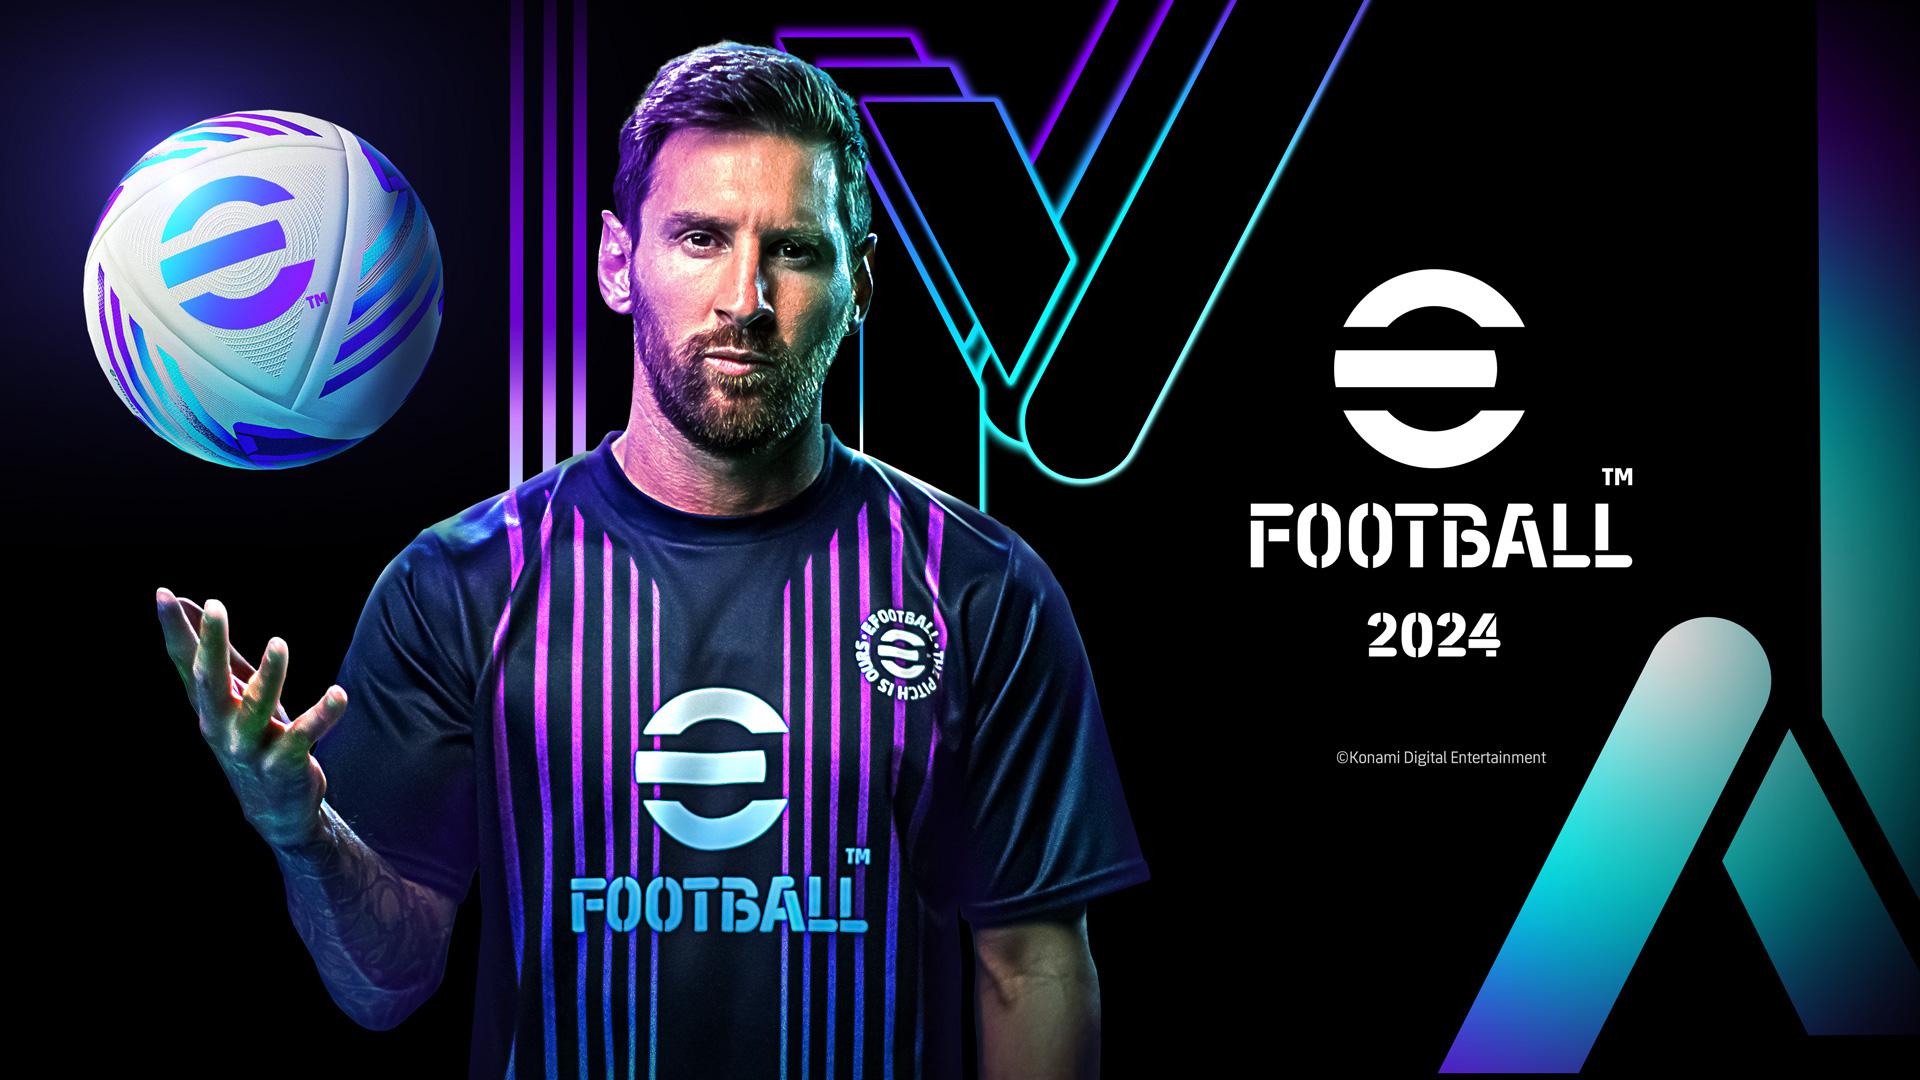 eFootball Reaches 750 million downloads: exclusive celebrations and promotions